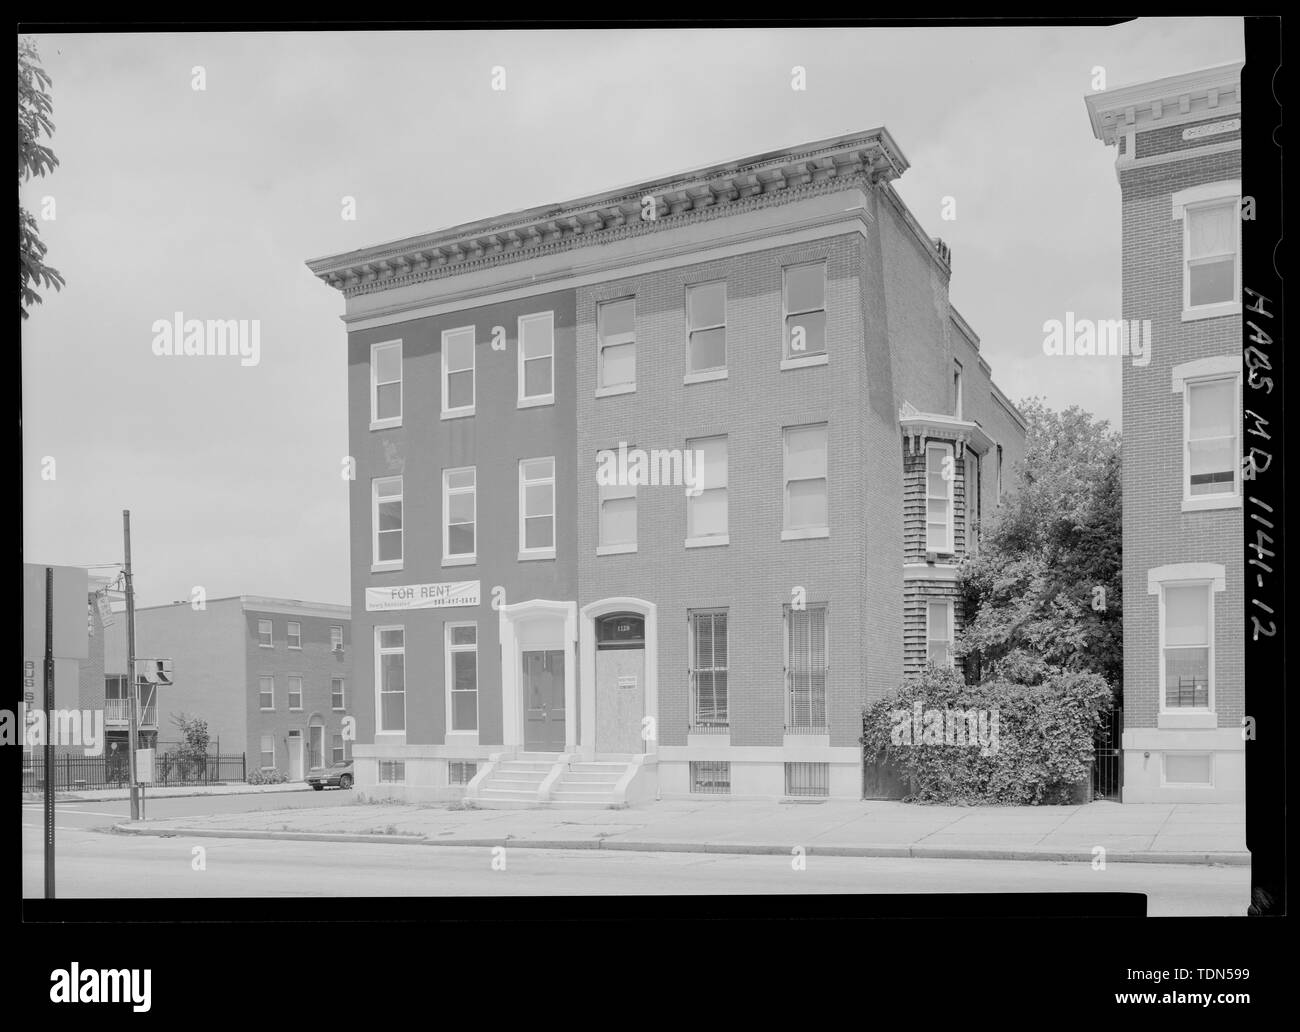 Perspective view looking to 1130 and 1128 Wesr Lafayette (Townsend) Avenue - Lafayette Square, Bounded by West Lafayette, North Arlington, West Lanvale and North Carrollton streets, Baltimore, Independent City, MD; Lafayette Square Association; Mitchell, Parren J; Davis, Frank E; Dixon and Carson architects; Rosenthal, James W, photographer; Perschler, Martin J, project manager; Price, Virginia B, transmitter; Perschler, Martin, project manager; Price, Virginia B, transmitter Stock Photo